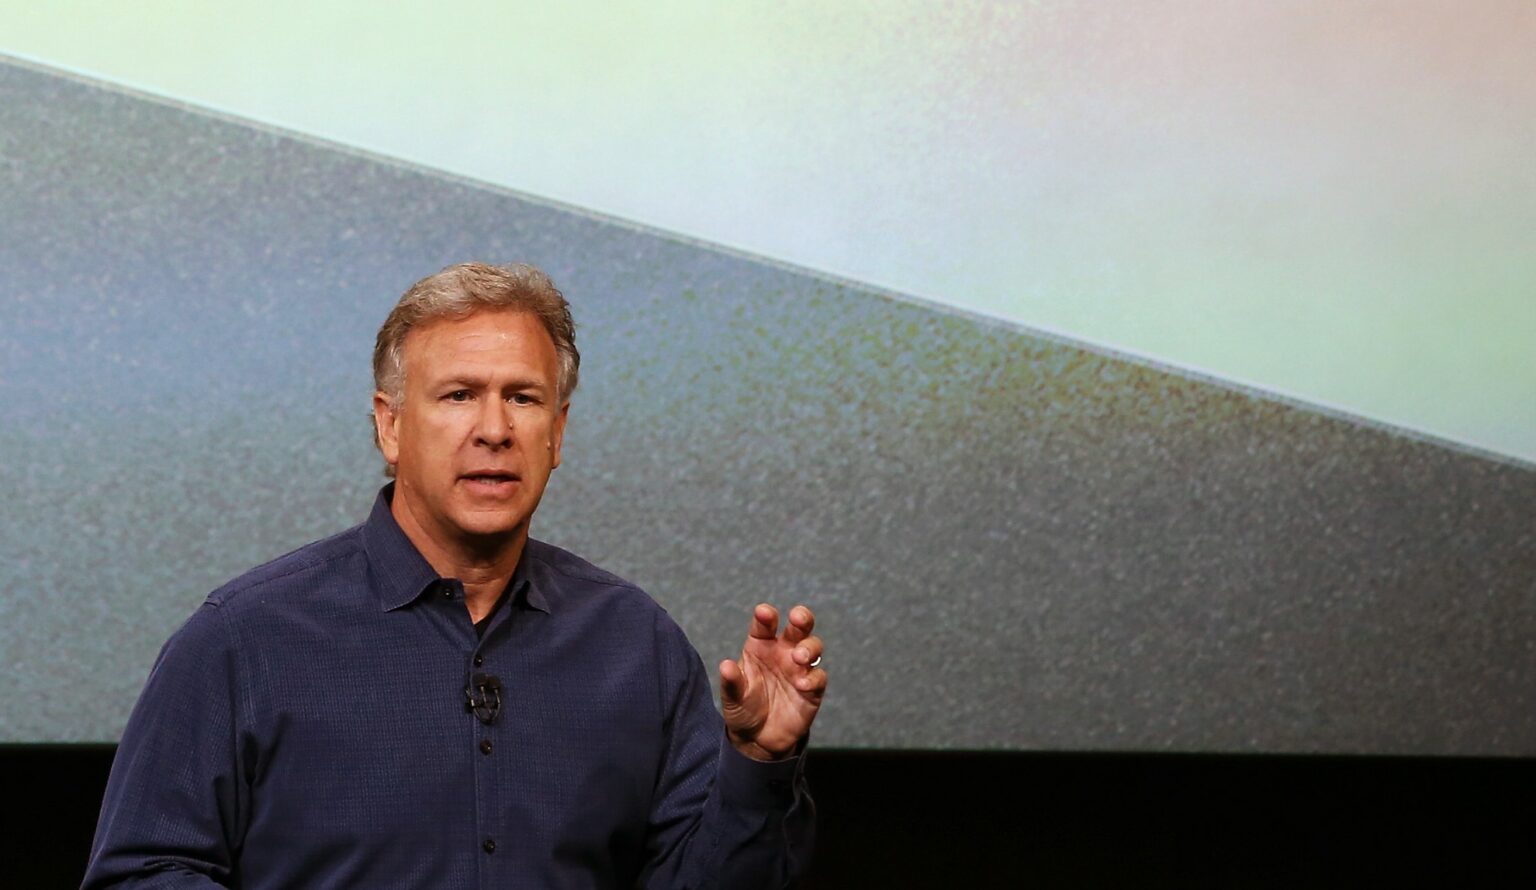 As Phil Schiller steps down from his role as Apple's SVP of worldwide marketing, it's clear the company won't be the same without him.